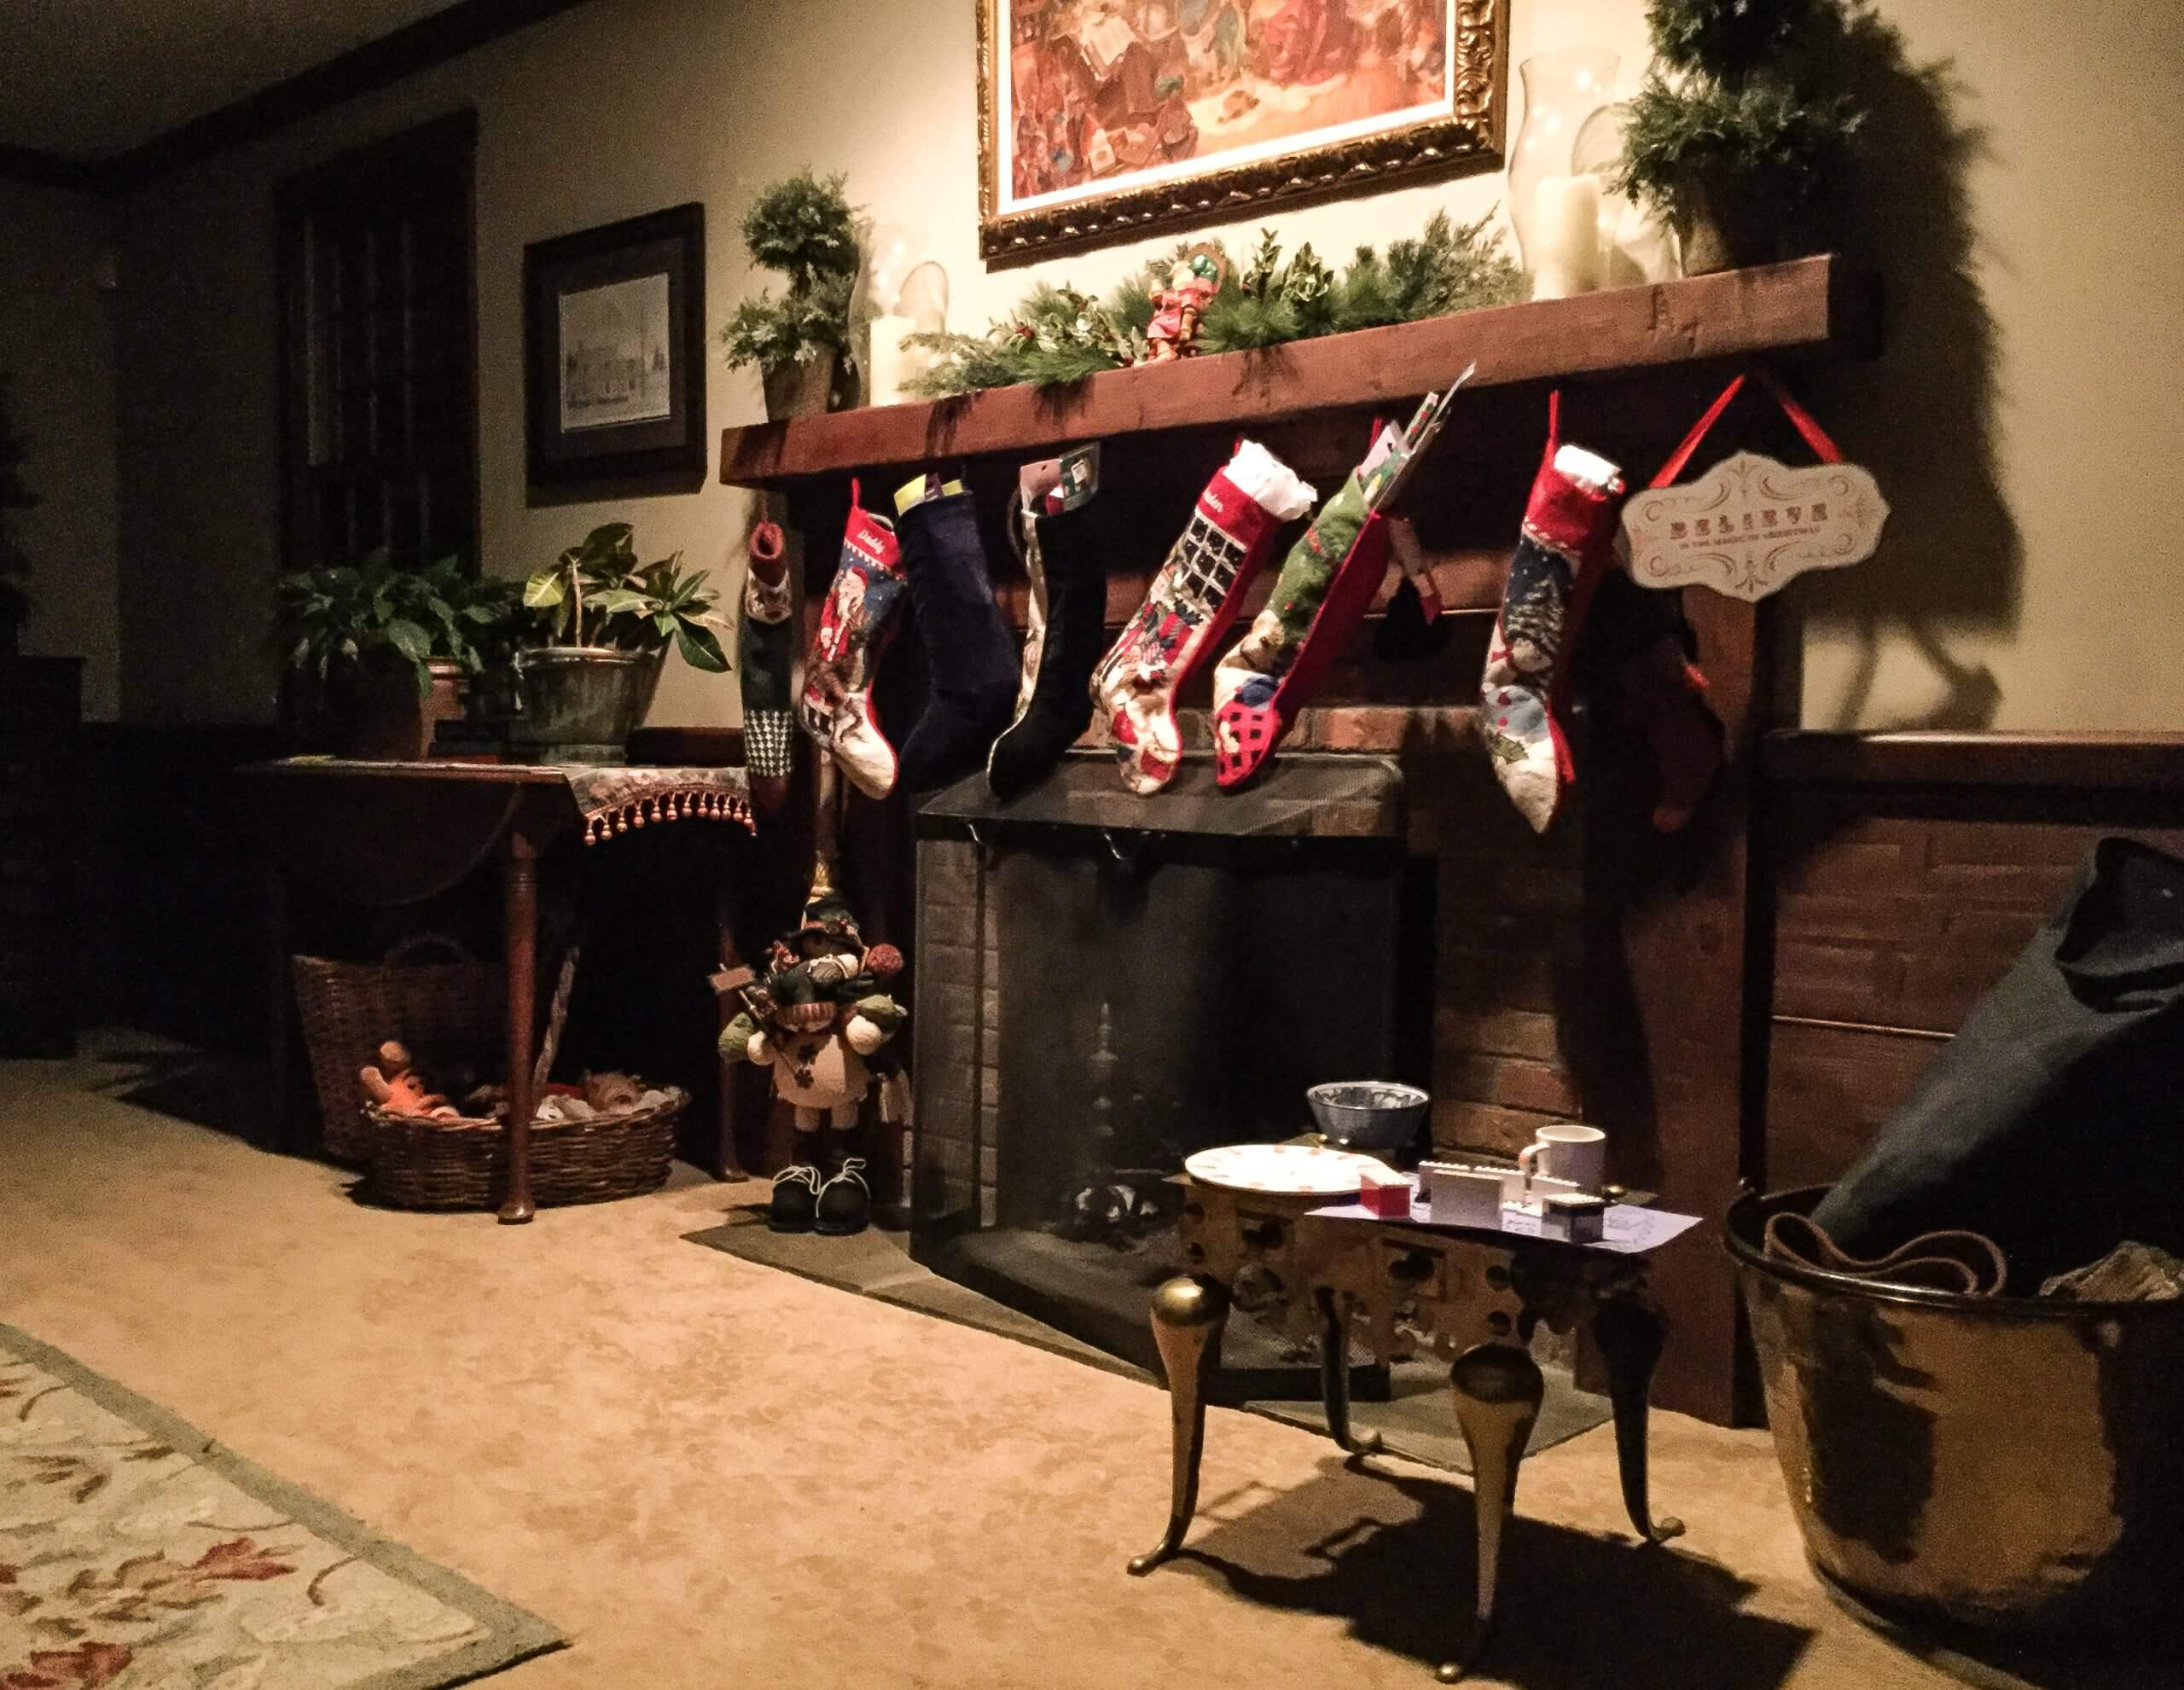 A living room is shown, including a fireplace with several Christmas stockings hung from the mantel.